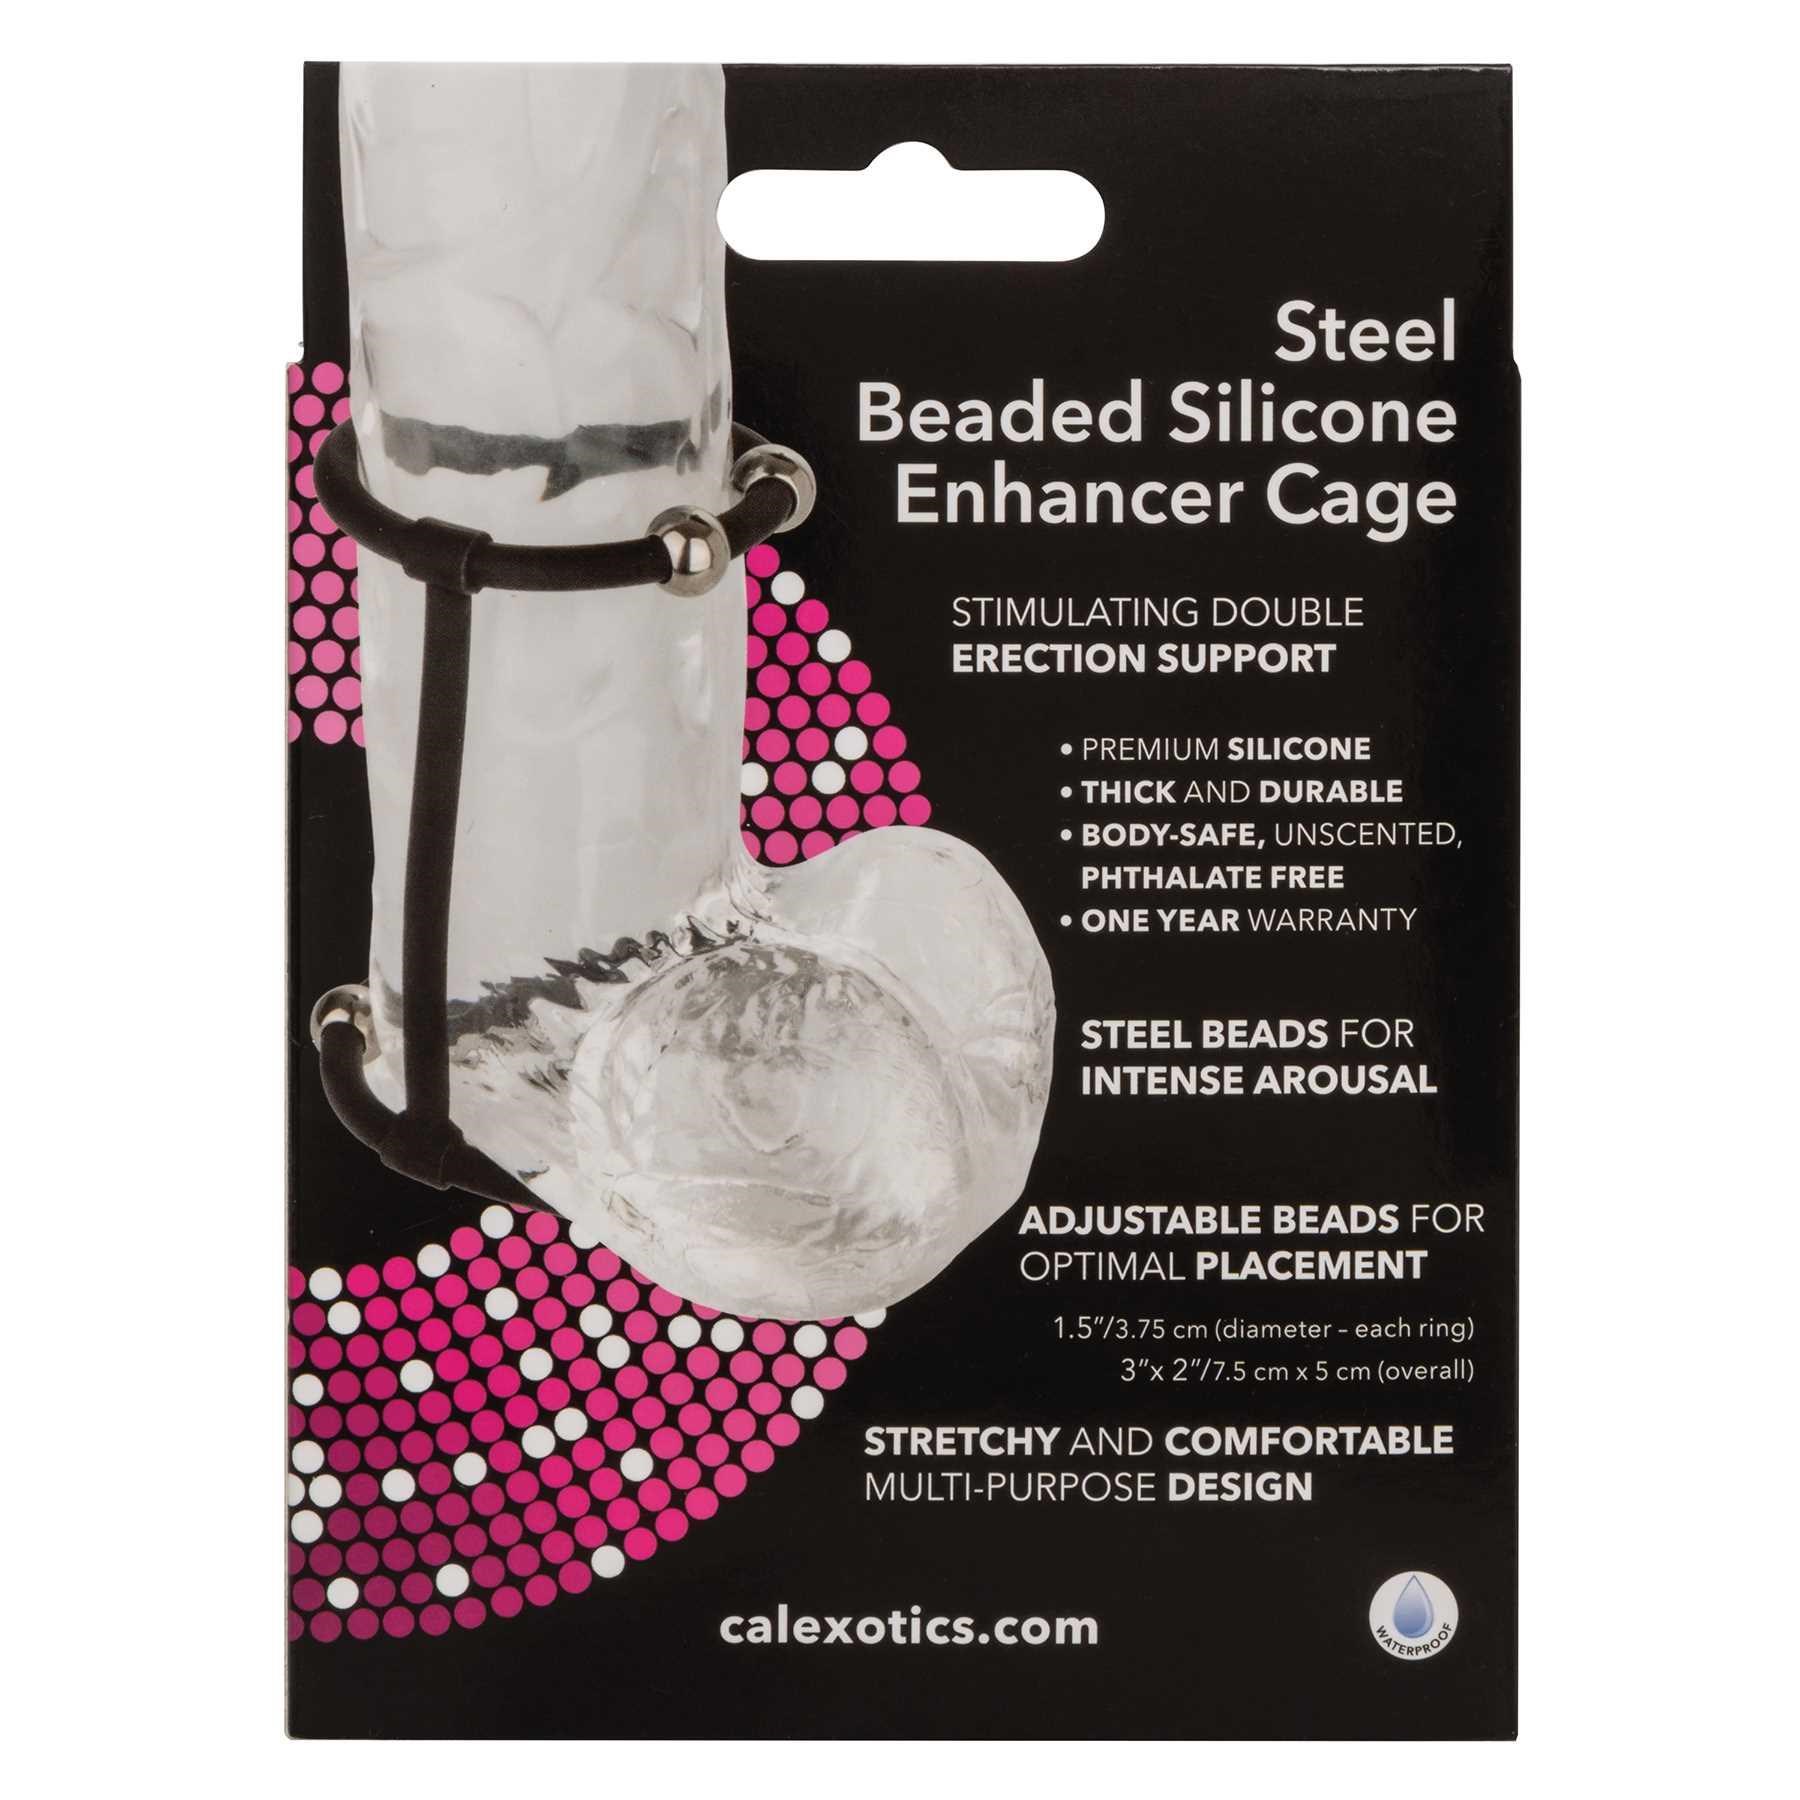 Steel Beaded Silicone Enhancer Cage packaging specifications